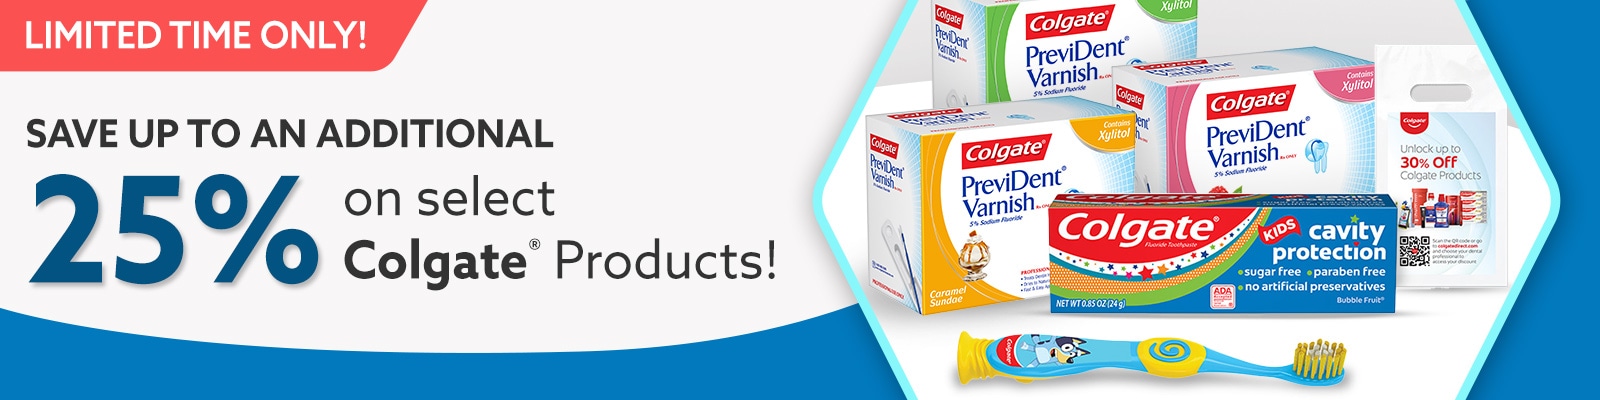 Limited Time Only! Save up to an Additional 15% on Select Colgate Products